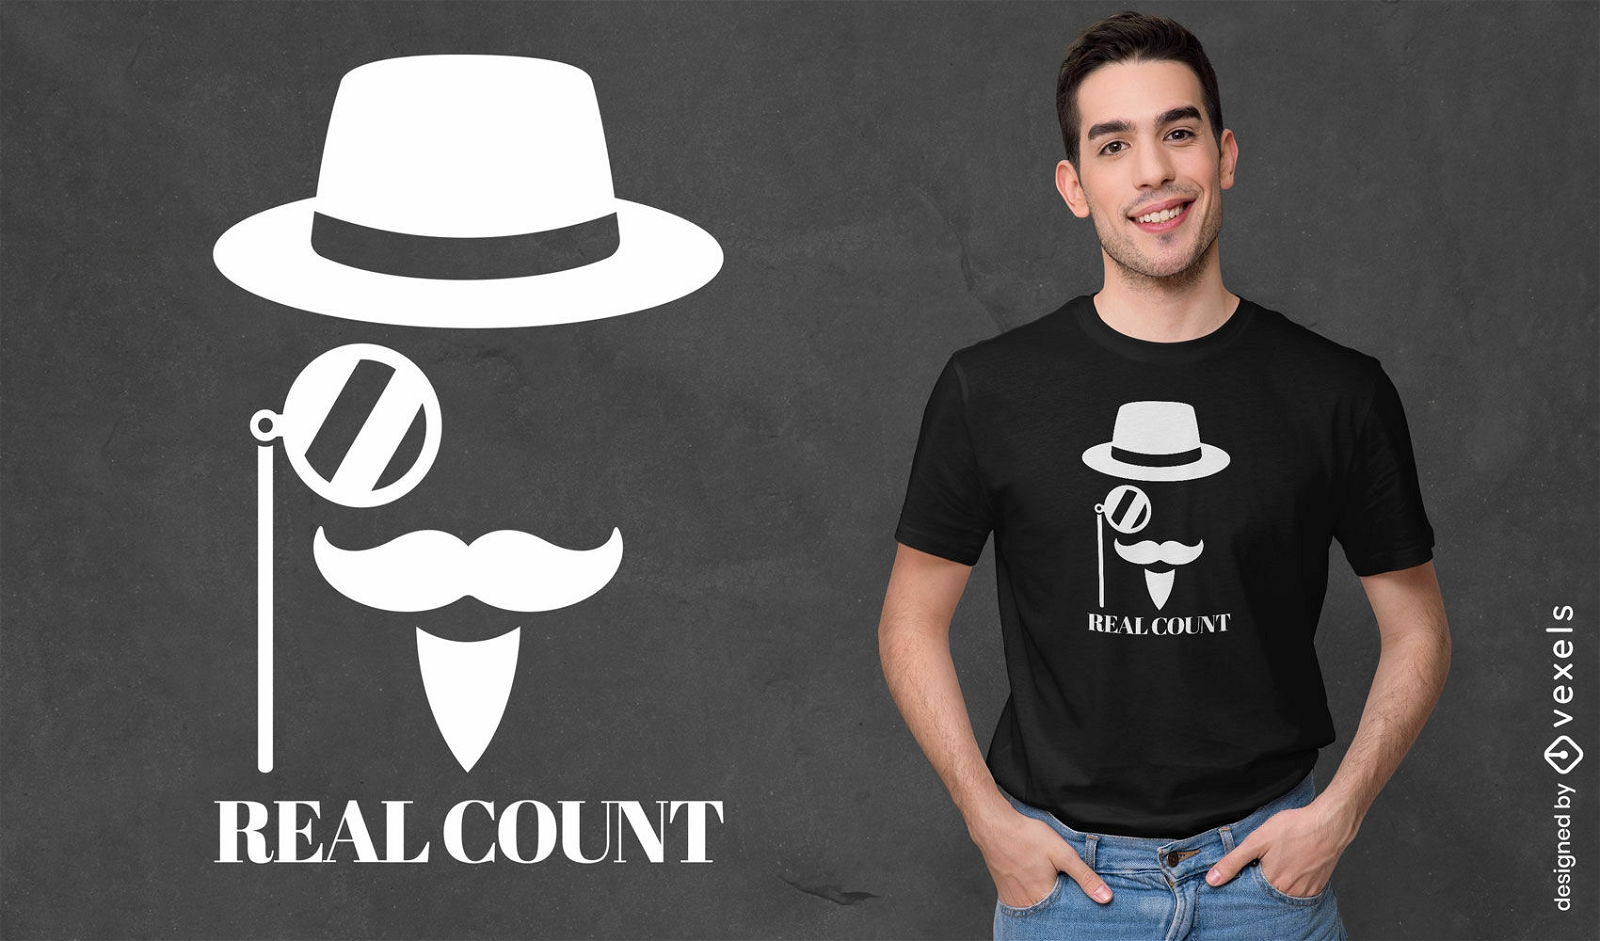 Real count t-shirt design